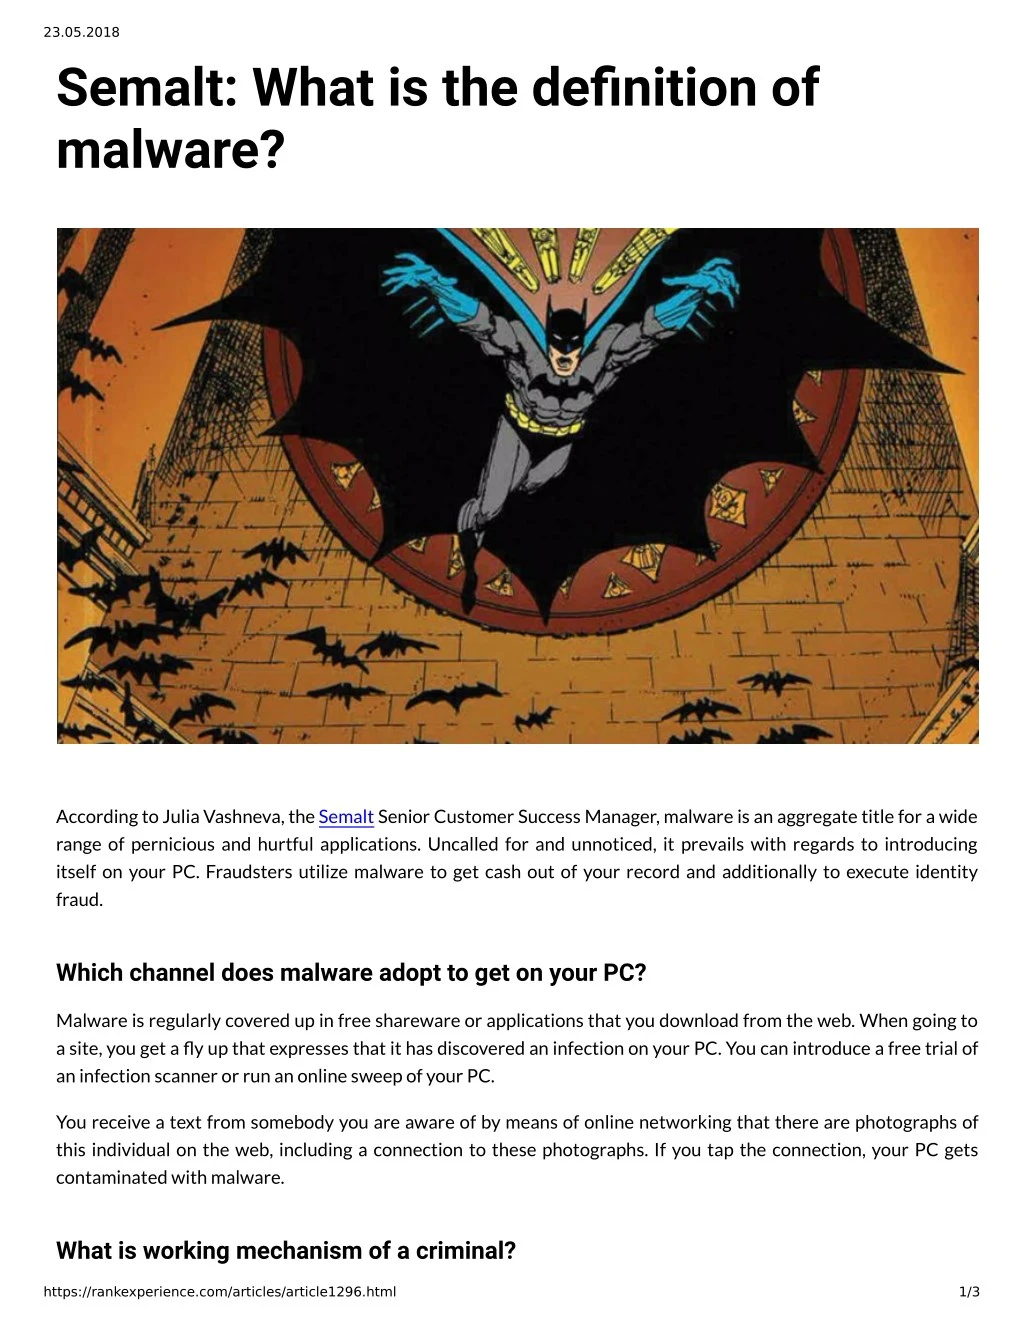 23 05 2018 semalt what is the de nition of malware